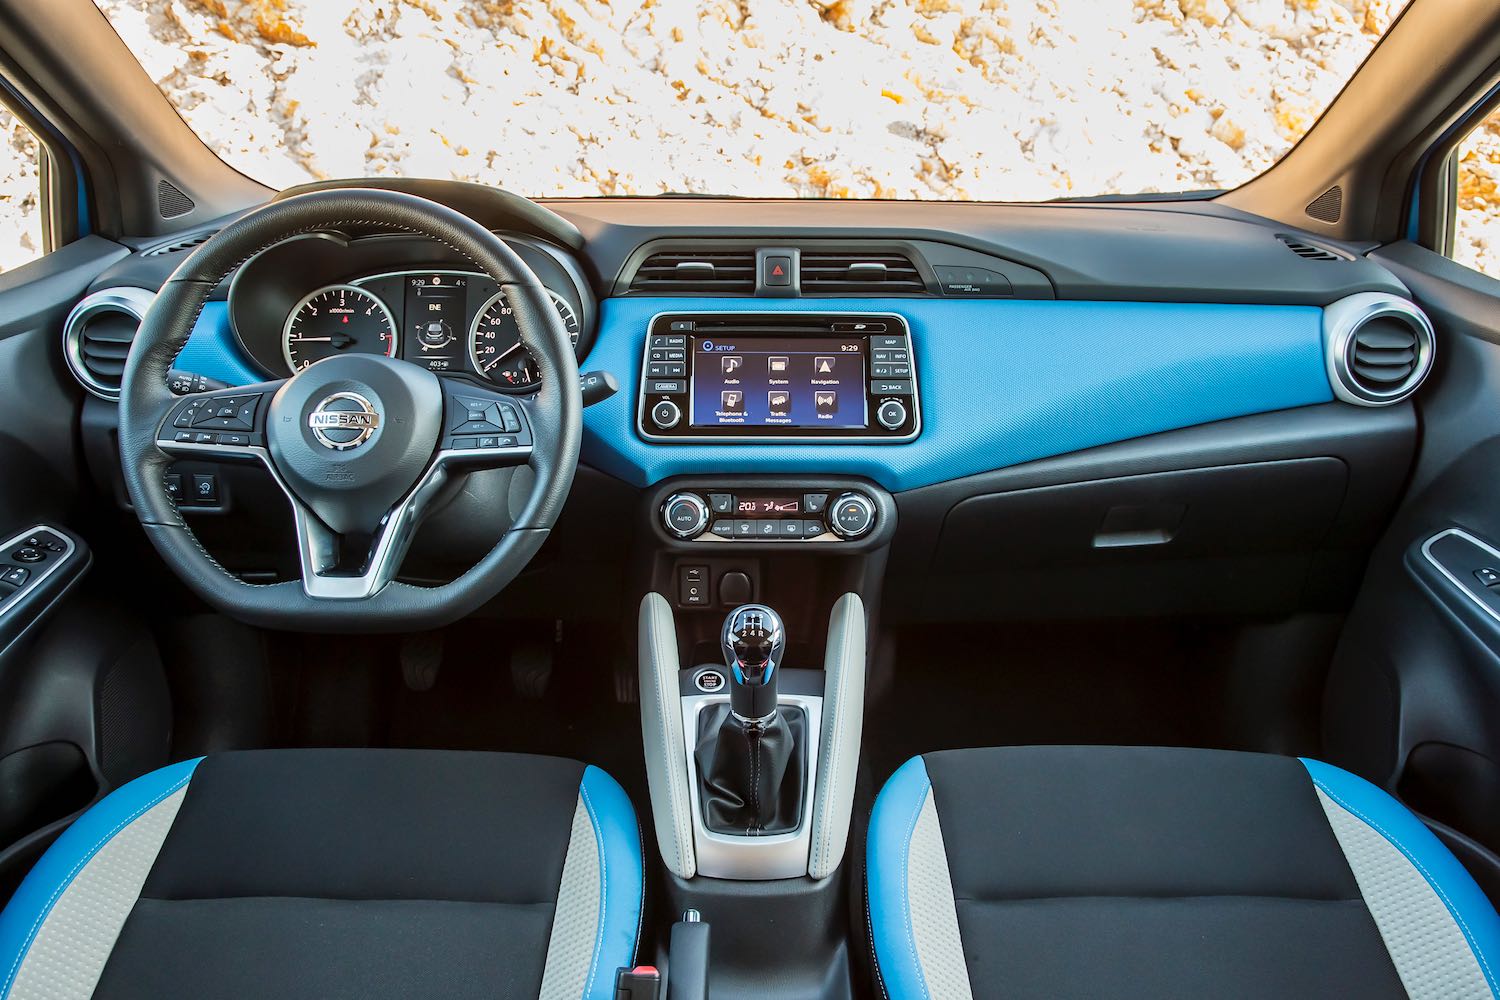 Jonathan Humphrey reviews the All-new nissan Micra 2107 for drive 19